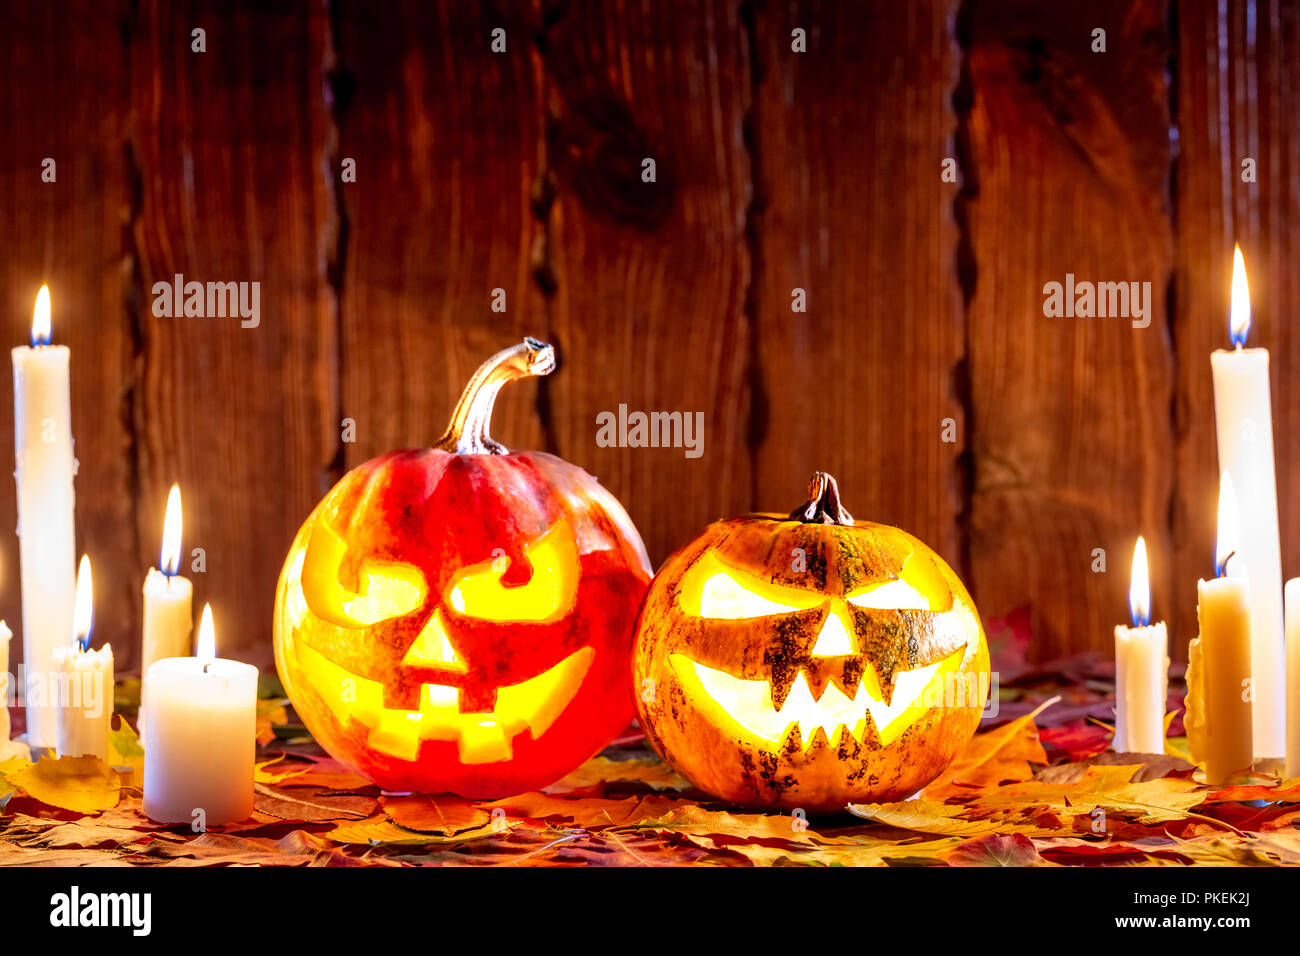 Halloween pumpkin with glowing face on a wooden background with many flaming candles and autumn leaves. Idea for flyers, poster, placard, billboard Stock Photo